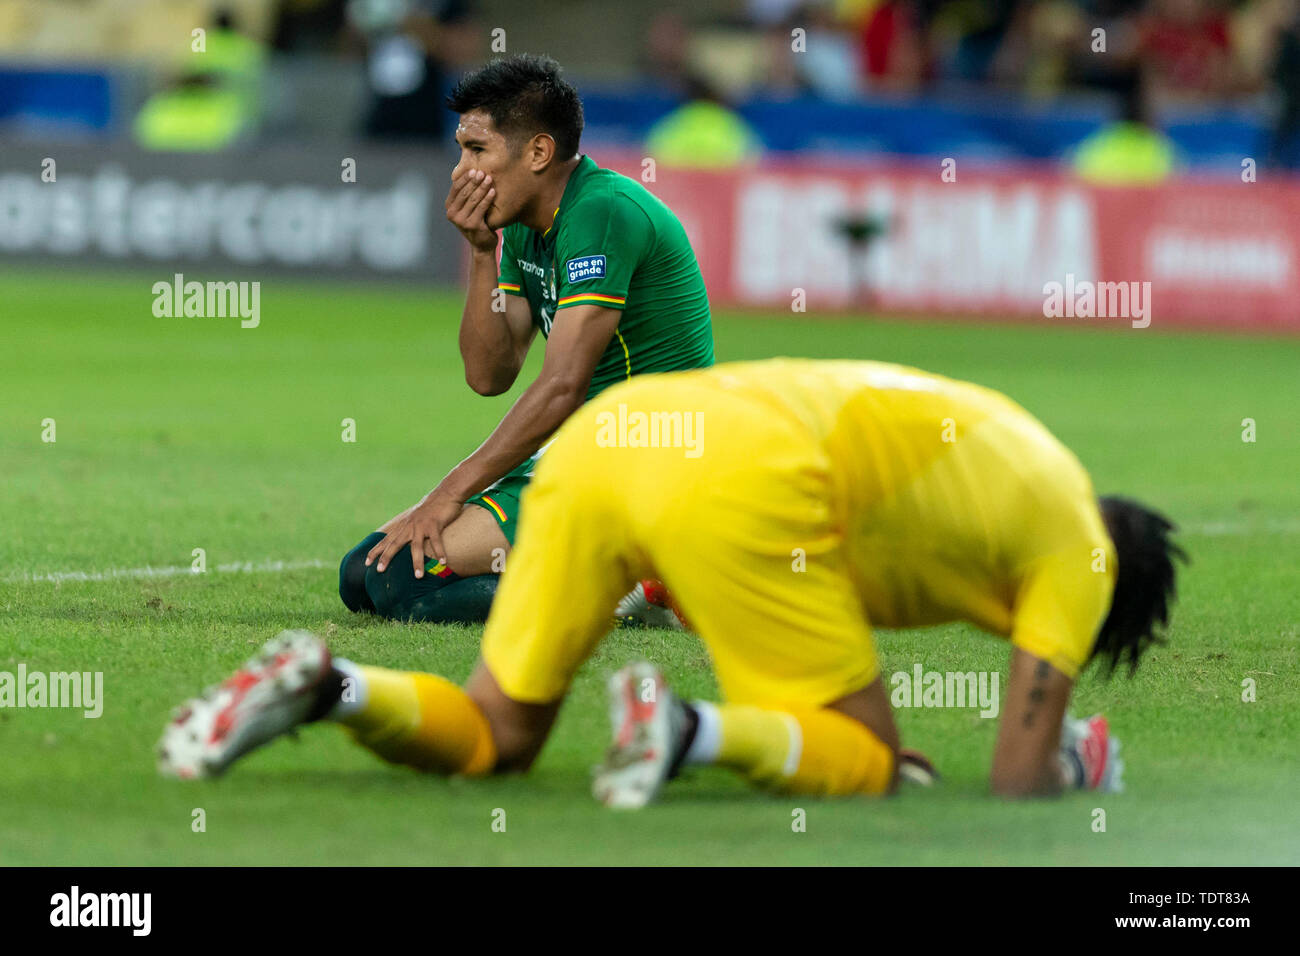 Rio De Janeiro, Brazil. 18th June, 2019. Saavedra Flores (Zagueiro) during a match between Bolivia and Peru, valid for the group stage of the Copa America 2019, held on Tuesday (18) at the Maracanã Stadium in Rio de Janeiro, RJ. Credit: Celso Pupo/FotoArena/Alamy Live News Stock Photo